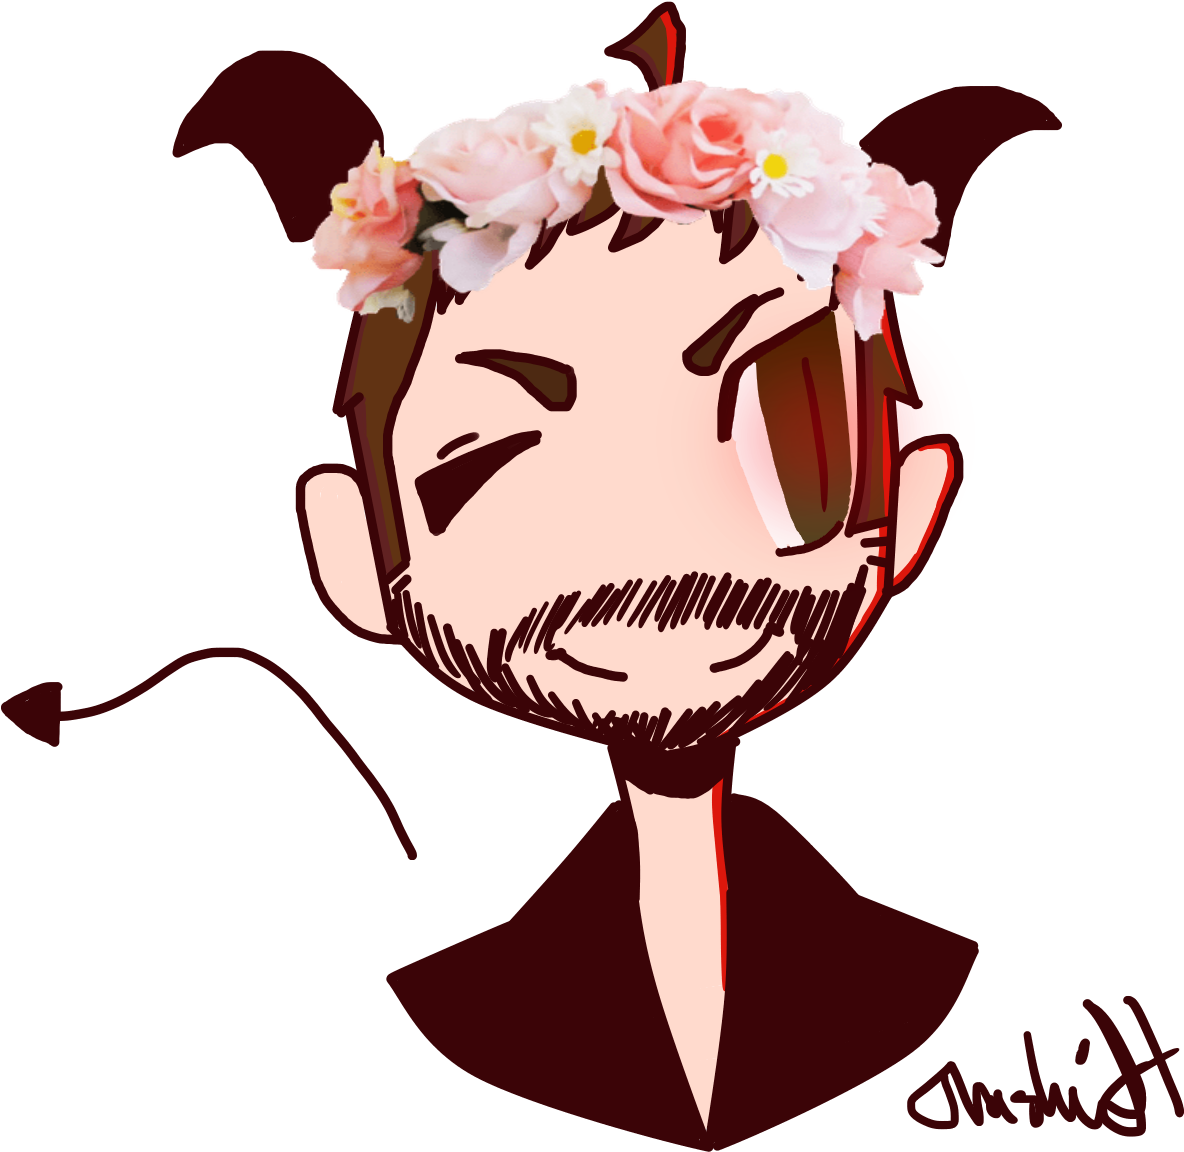 Its My Boi, Crowley, With A Flower Crown - Illustration (1600x1200)